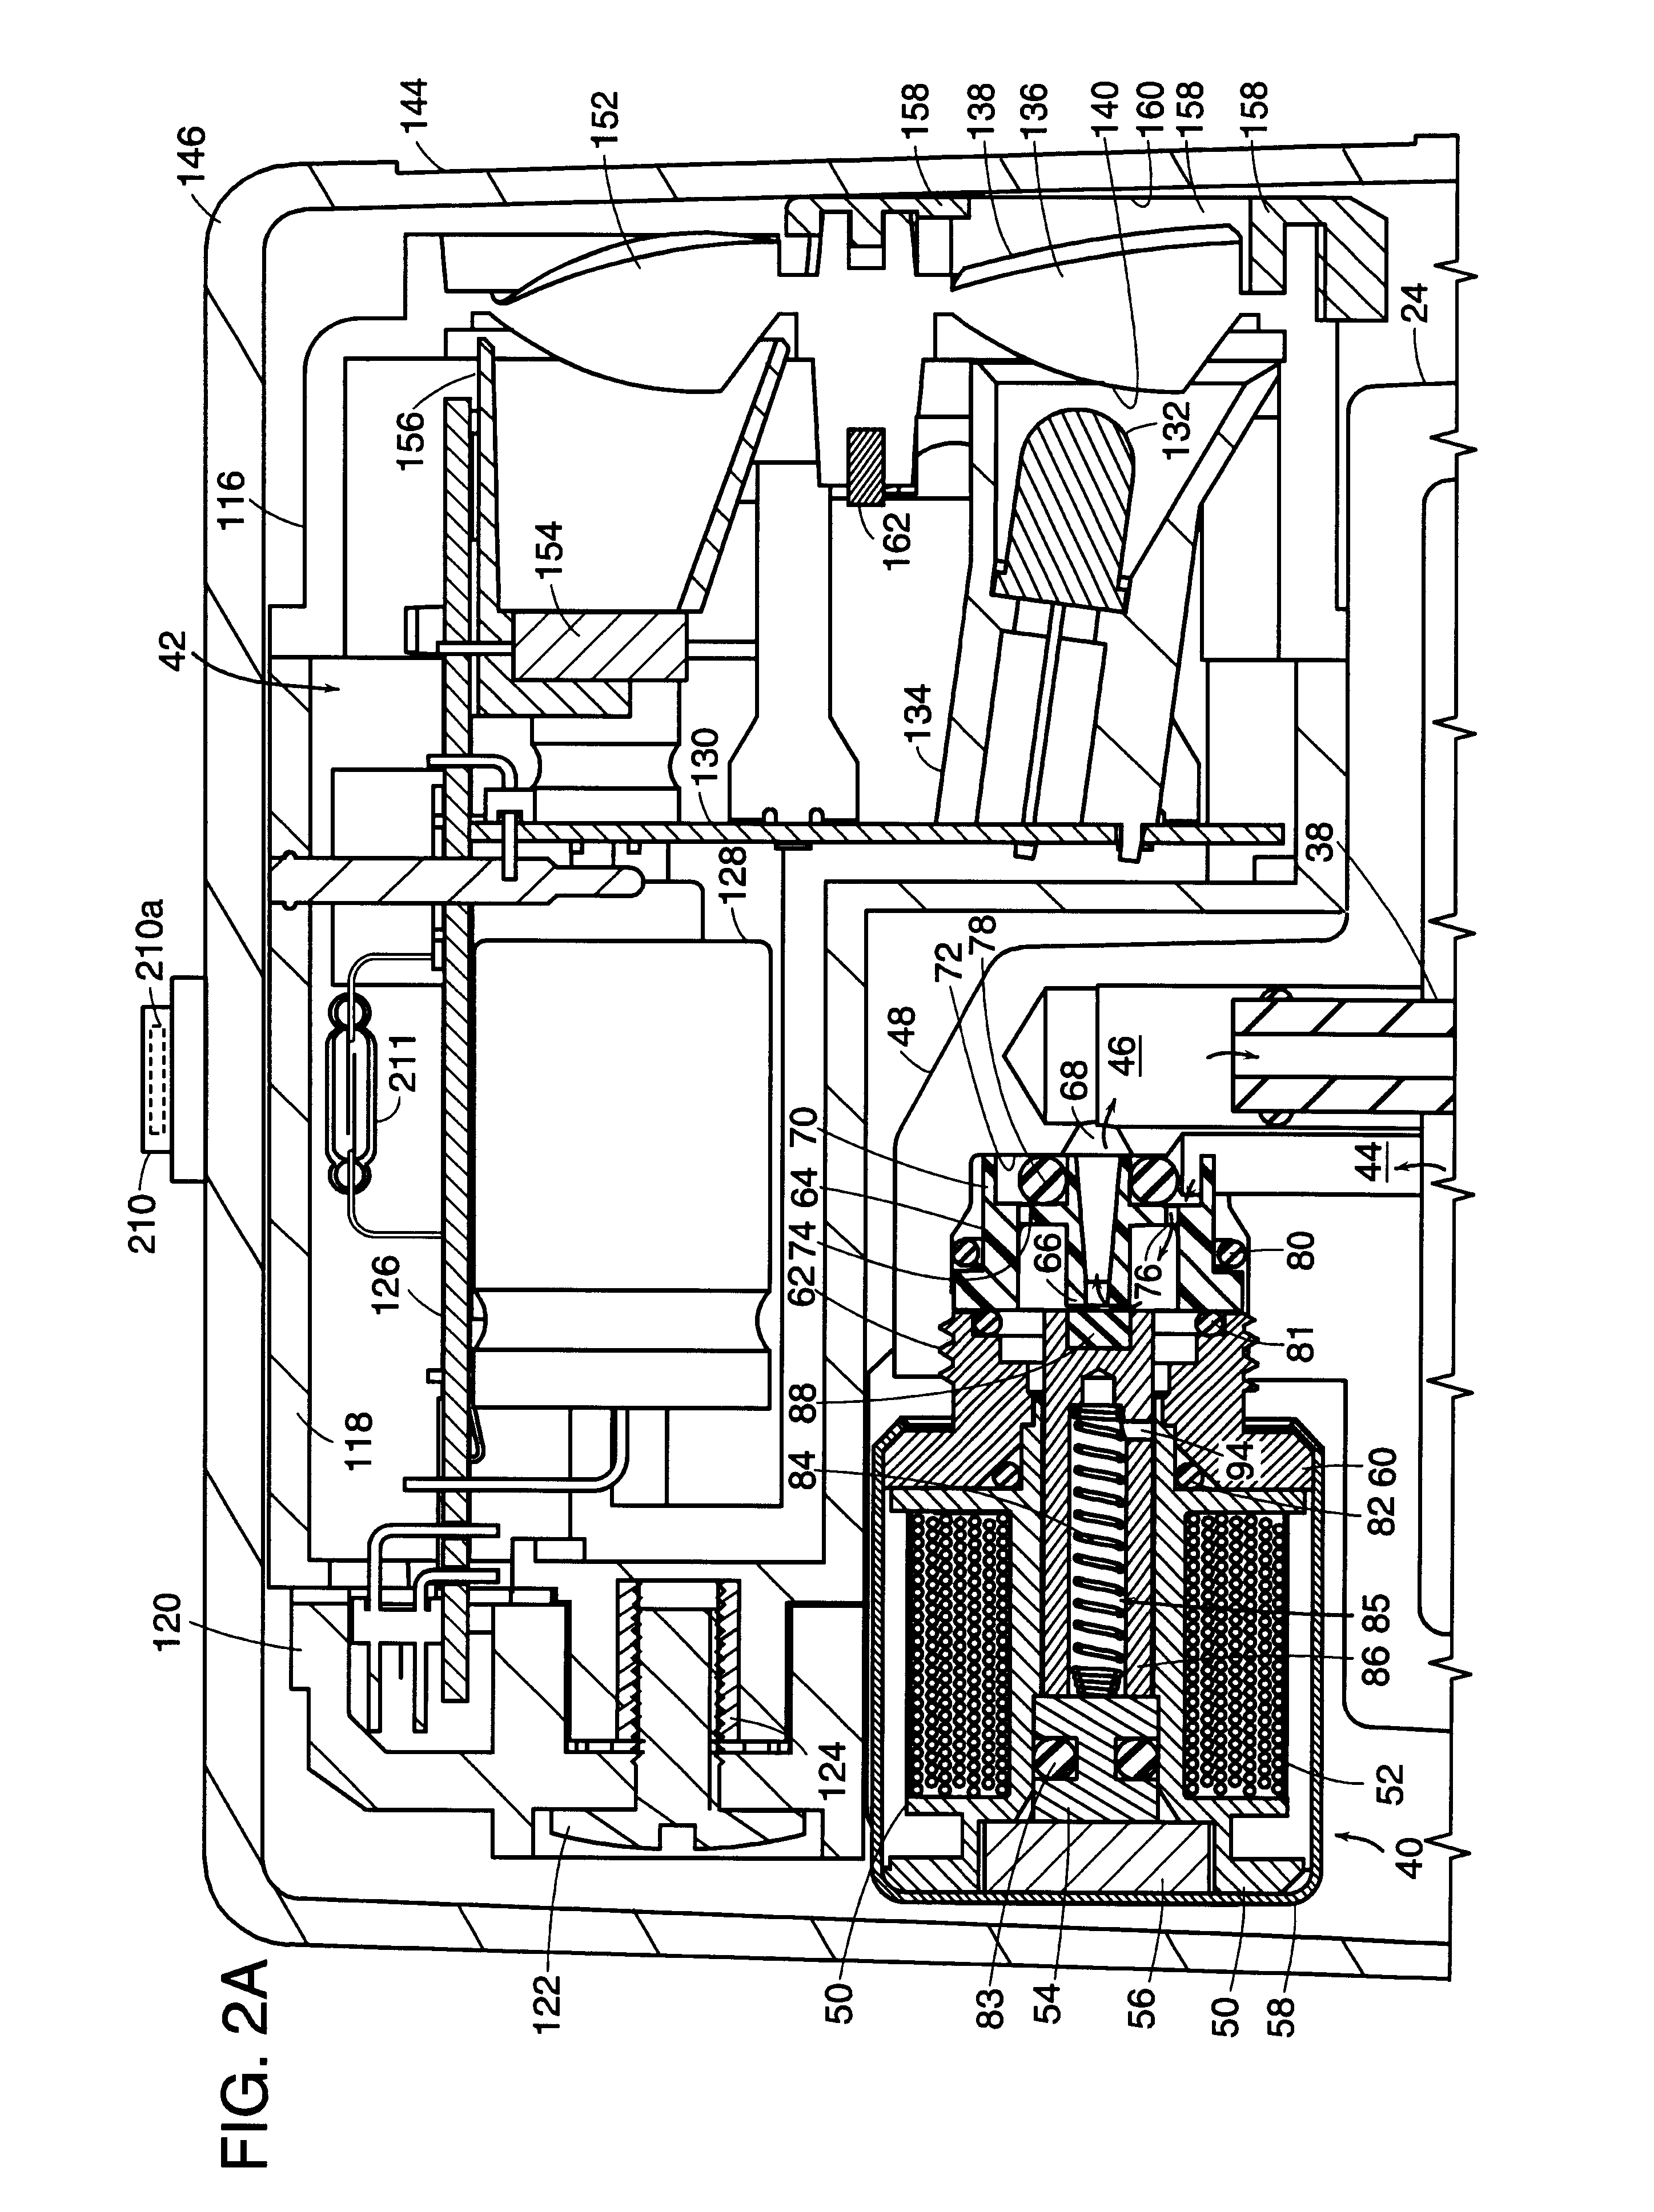 Adaptive object-sensing system for automatic flusher